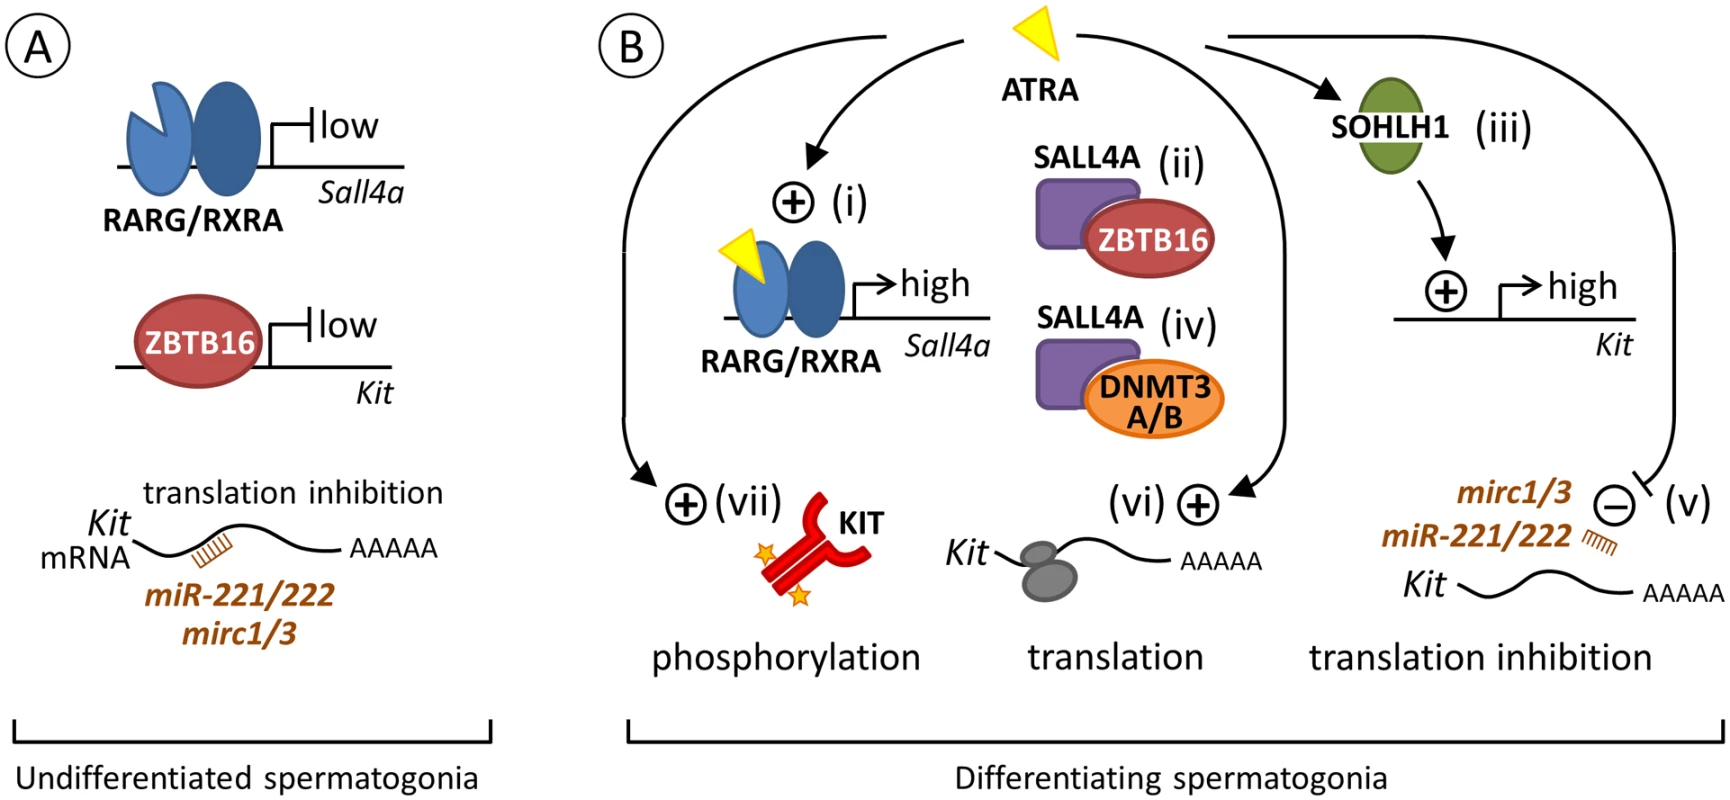 Proposed model for the regulation of <i>Kit</i> expression by ATRA during the transition from A<sub>al</sub> to A<sub>1</sub> spermatogonia.